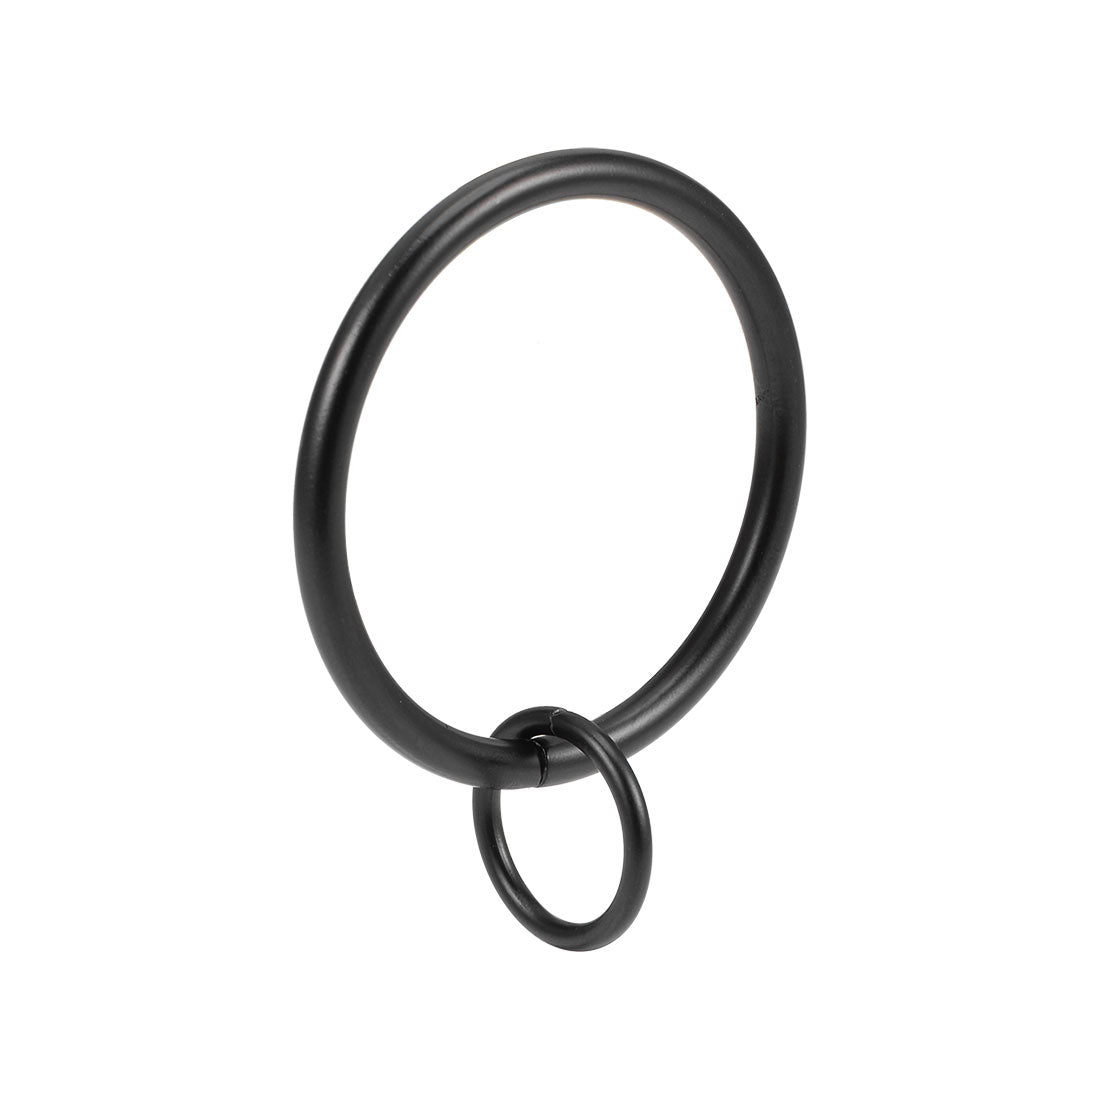 uxcell Uxcell Curtain Ring Metal 37mm Inner Dia Drapery Ring for Curtain Rods Black 7 Pcs